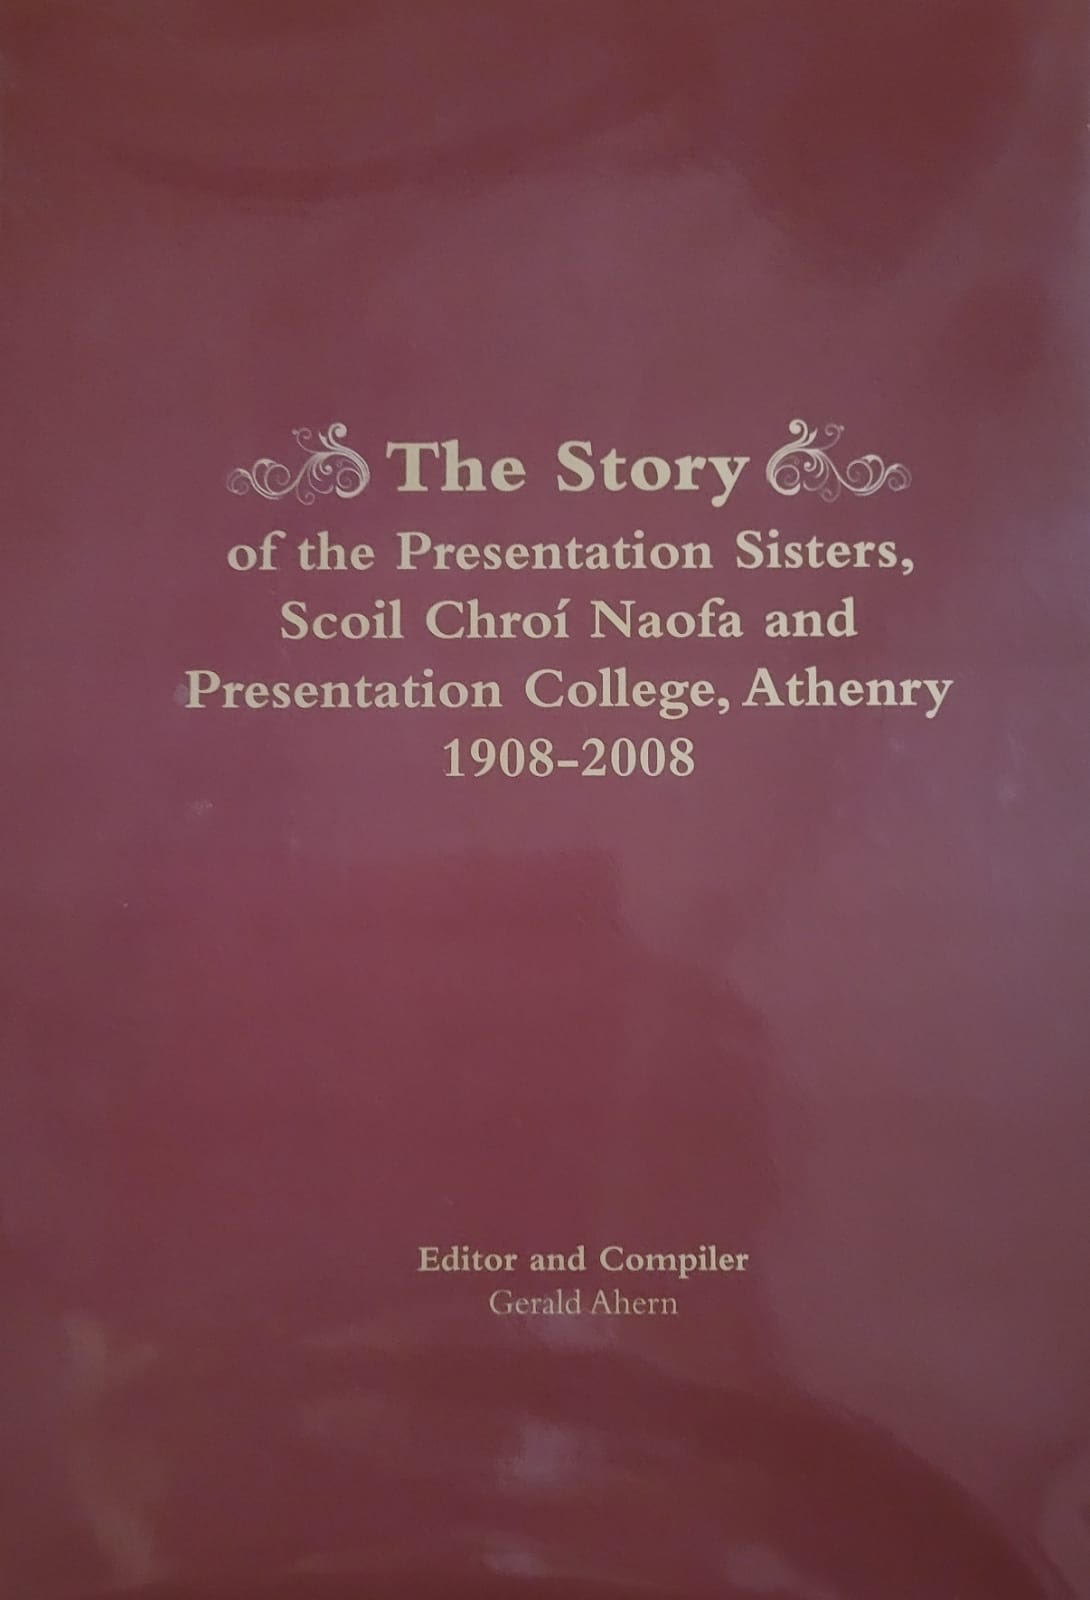 The Story of the Presentation Sisters, Scoil Chroi Naofa and Presentation College, Athenry 1908-2008 | Gerald Ahern | Charlie Byrne's